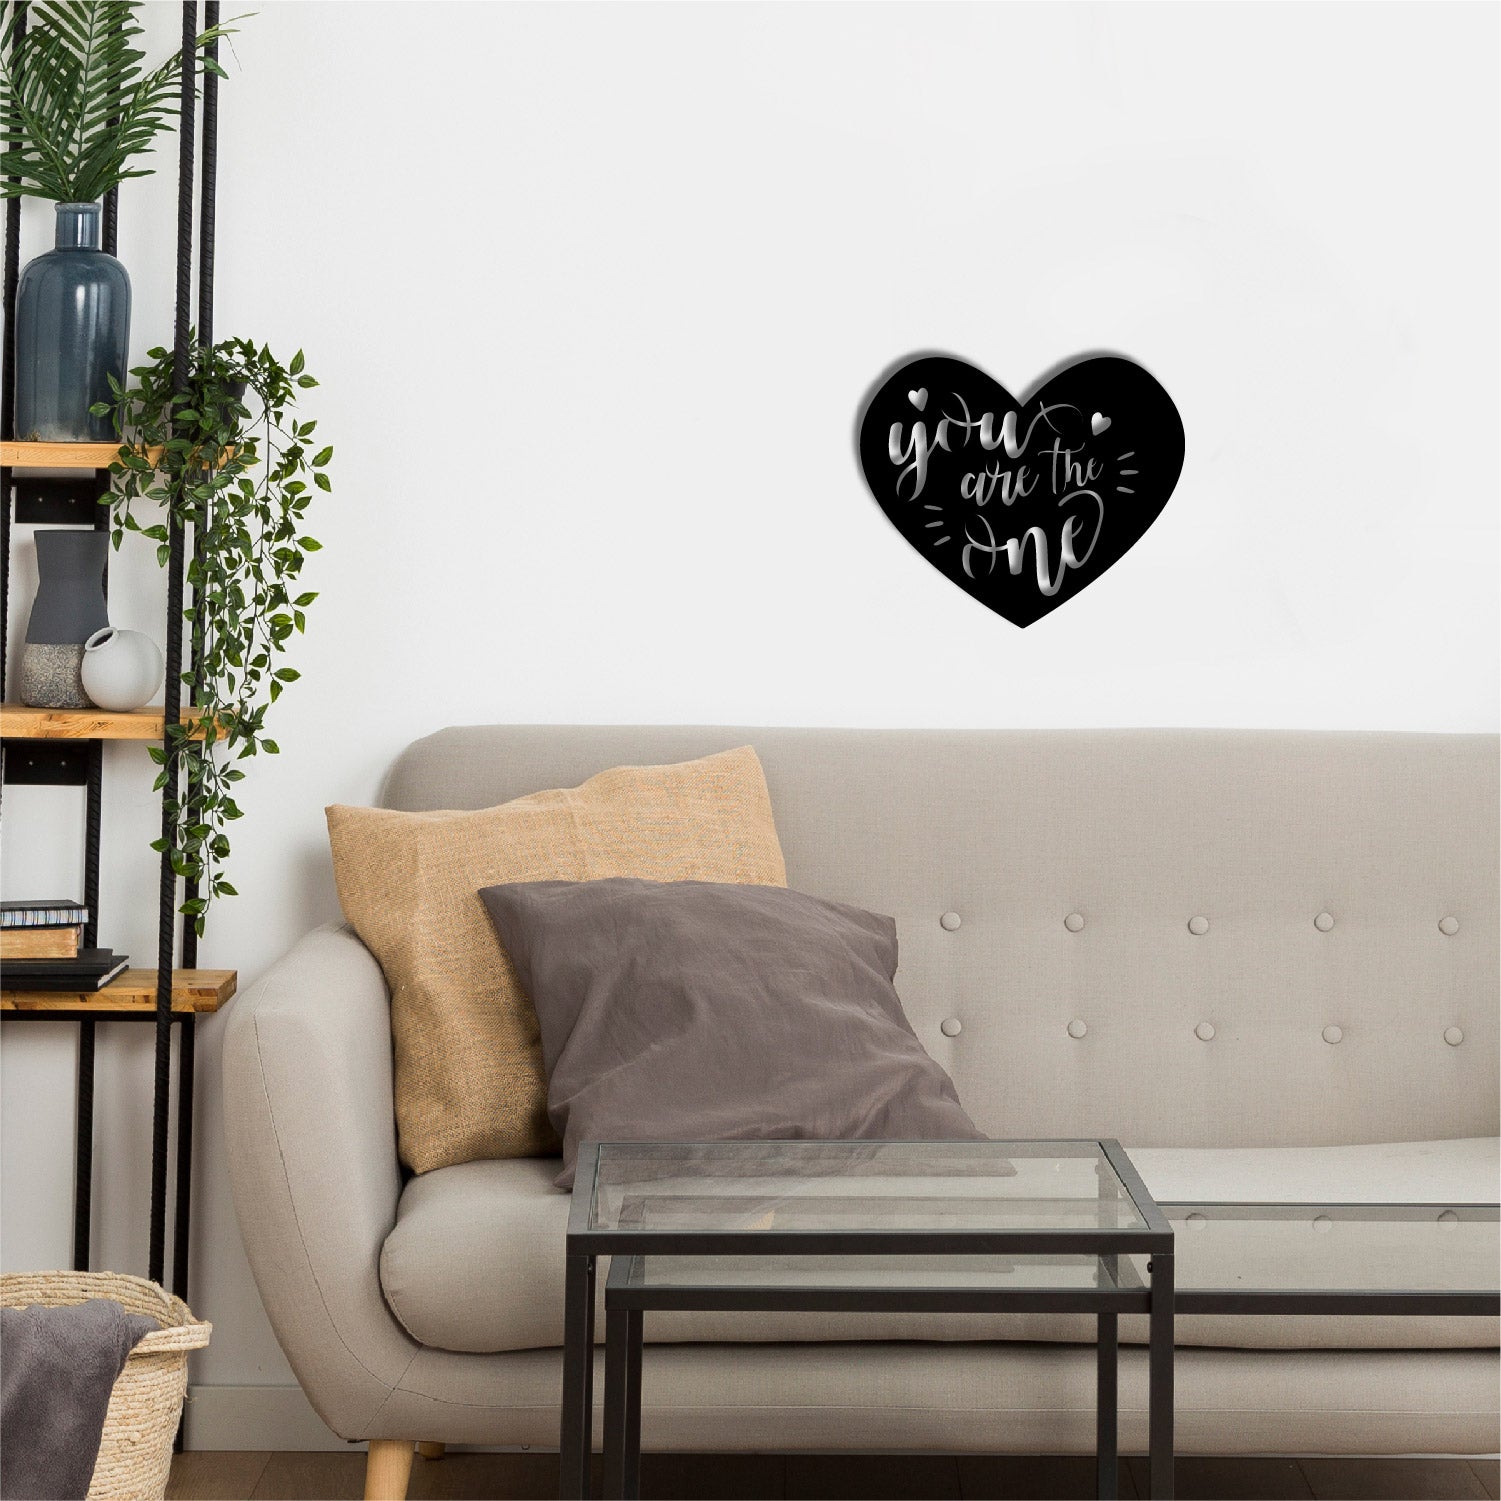 "You are the One" Love Theme Black Engineered Wood Wall Art Cutout, Ready to Hang Home Decor 1